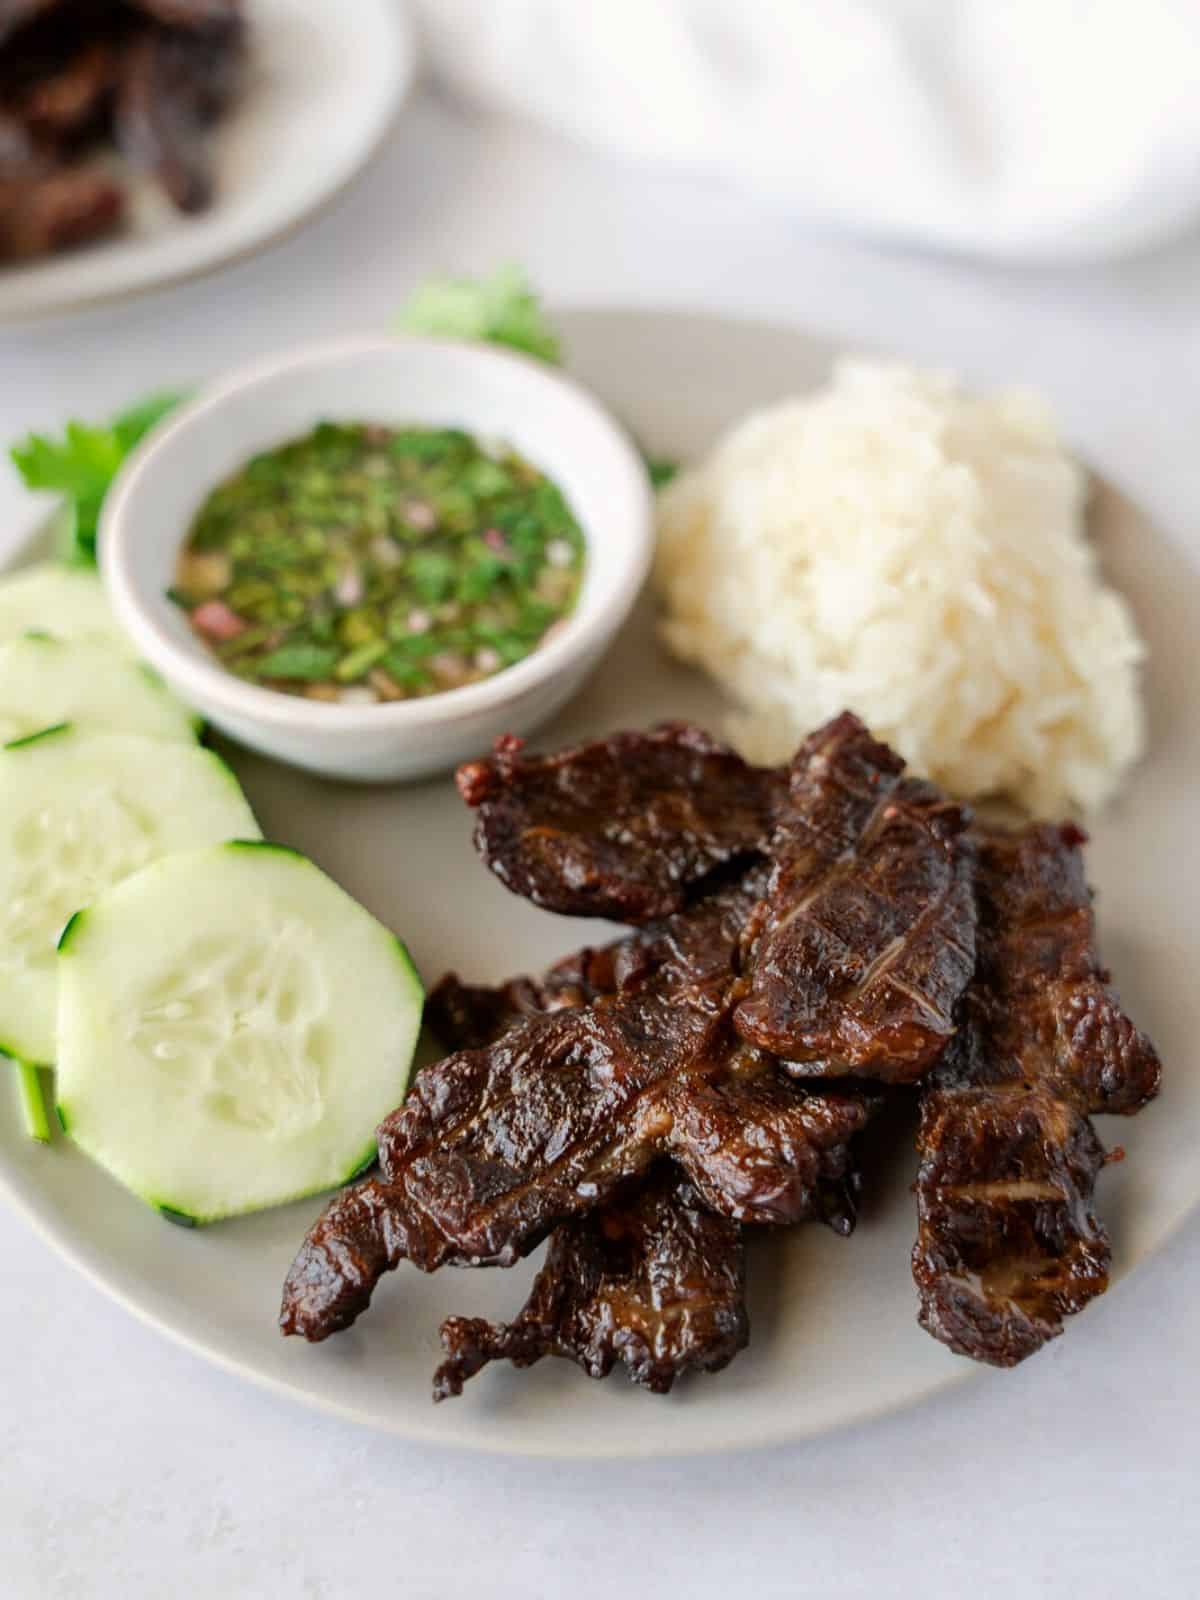 Cooked beef jerky on a plate with cucumber and sticky rice.